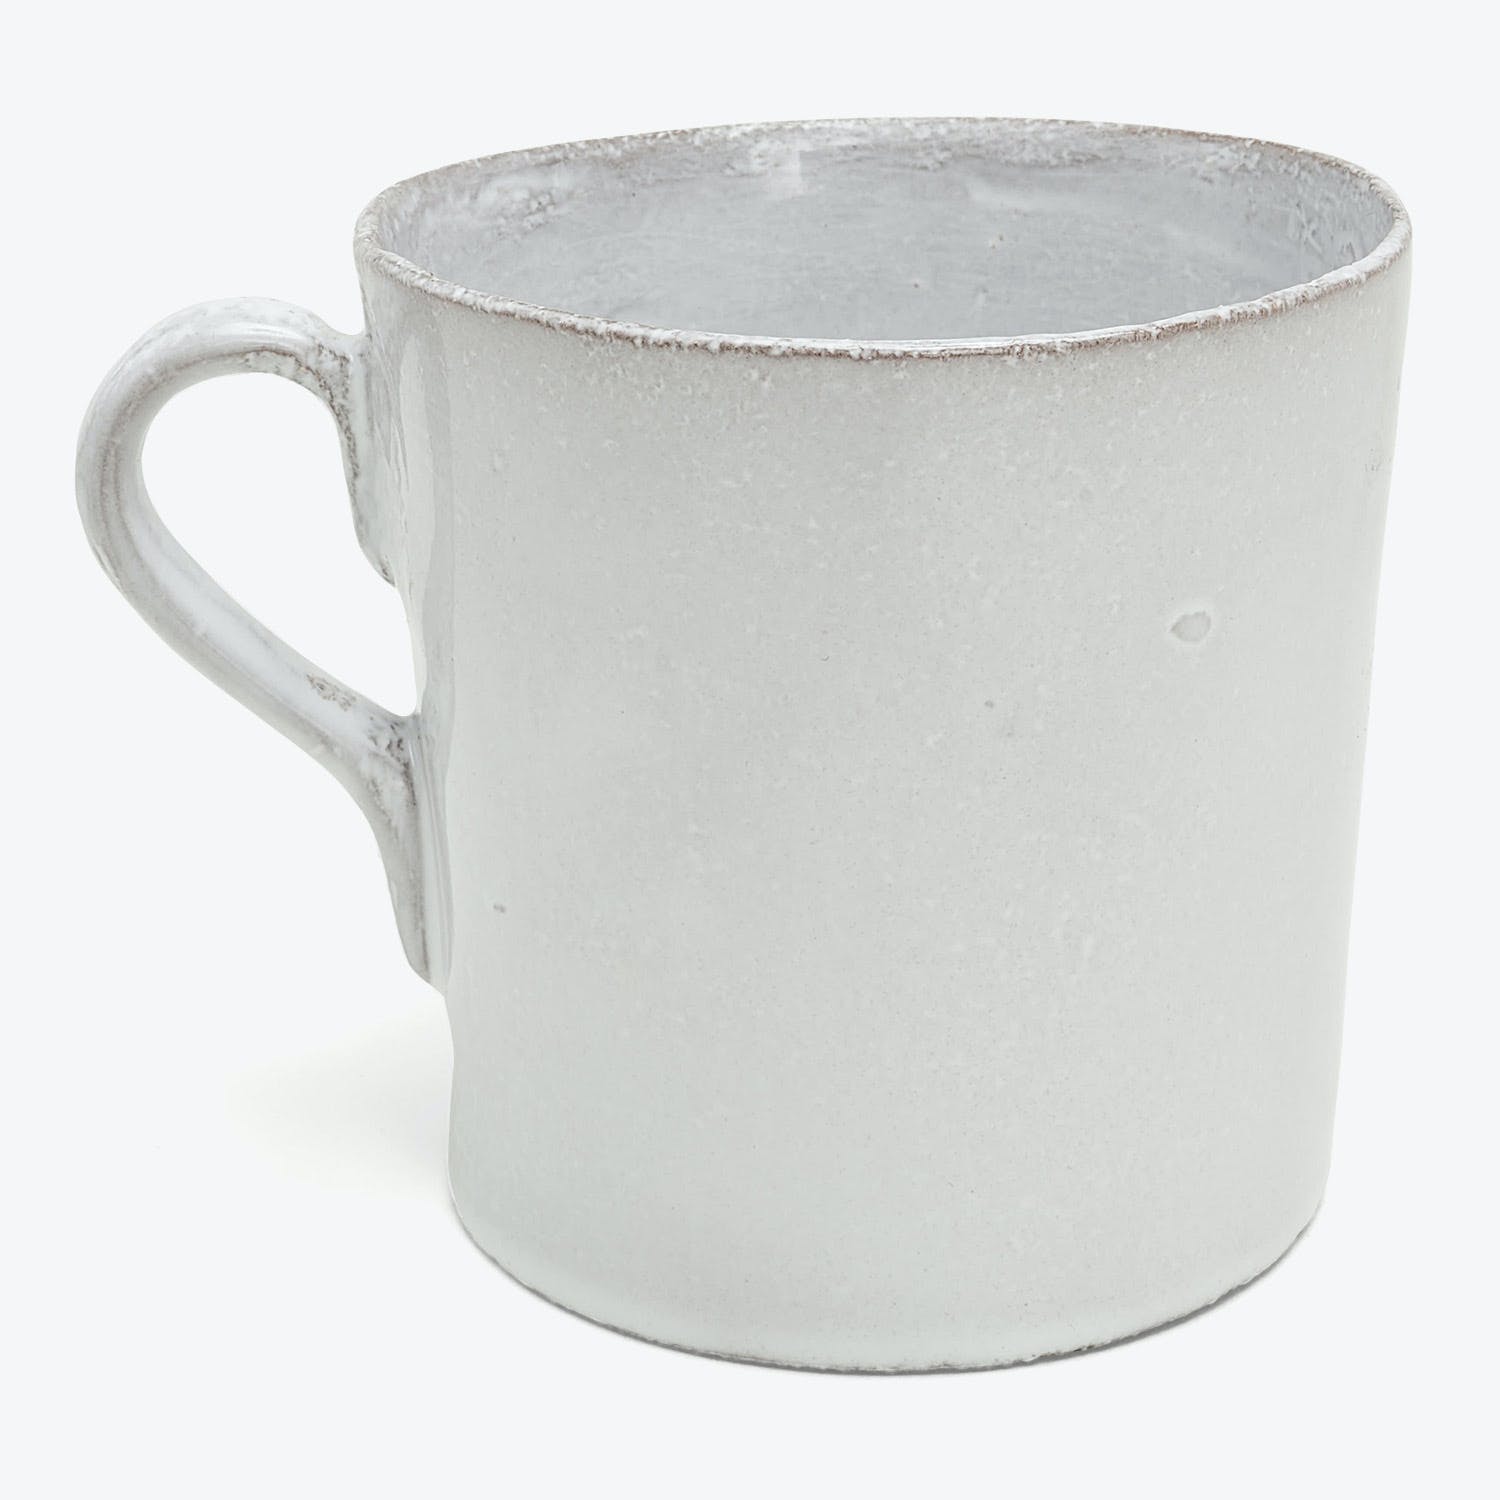 Handcrafted ceramic mug with rustic whitewash finish and textured surface